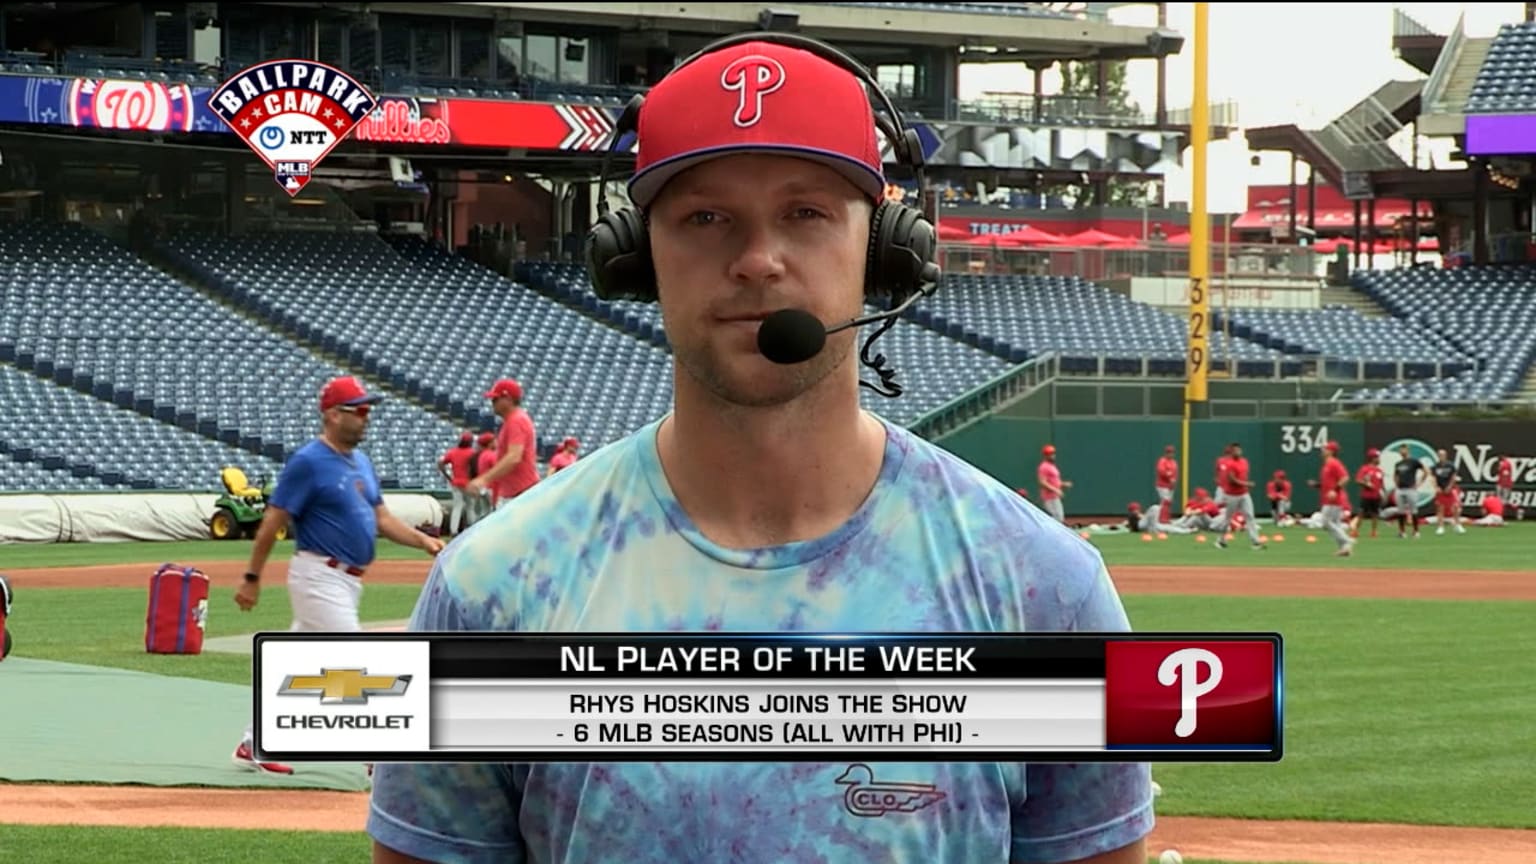 Rhys Hoskins on X: #PlayersWeekend is one of the cooler weekends